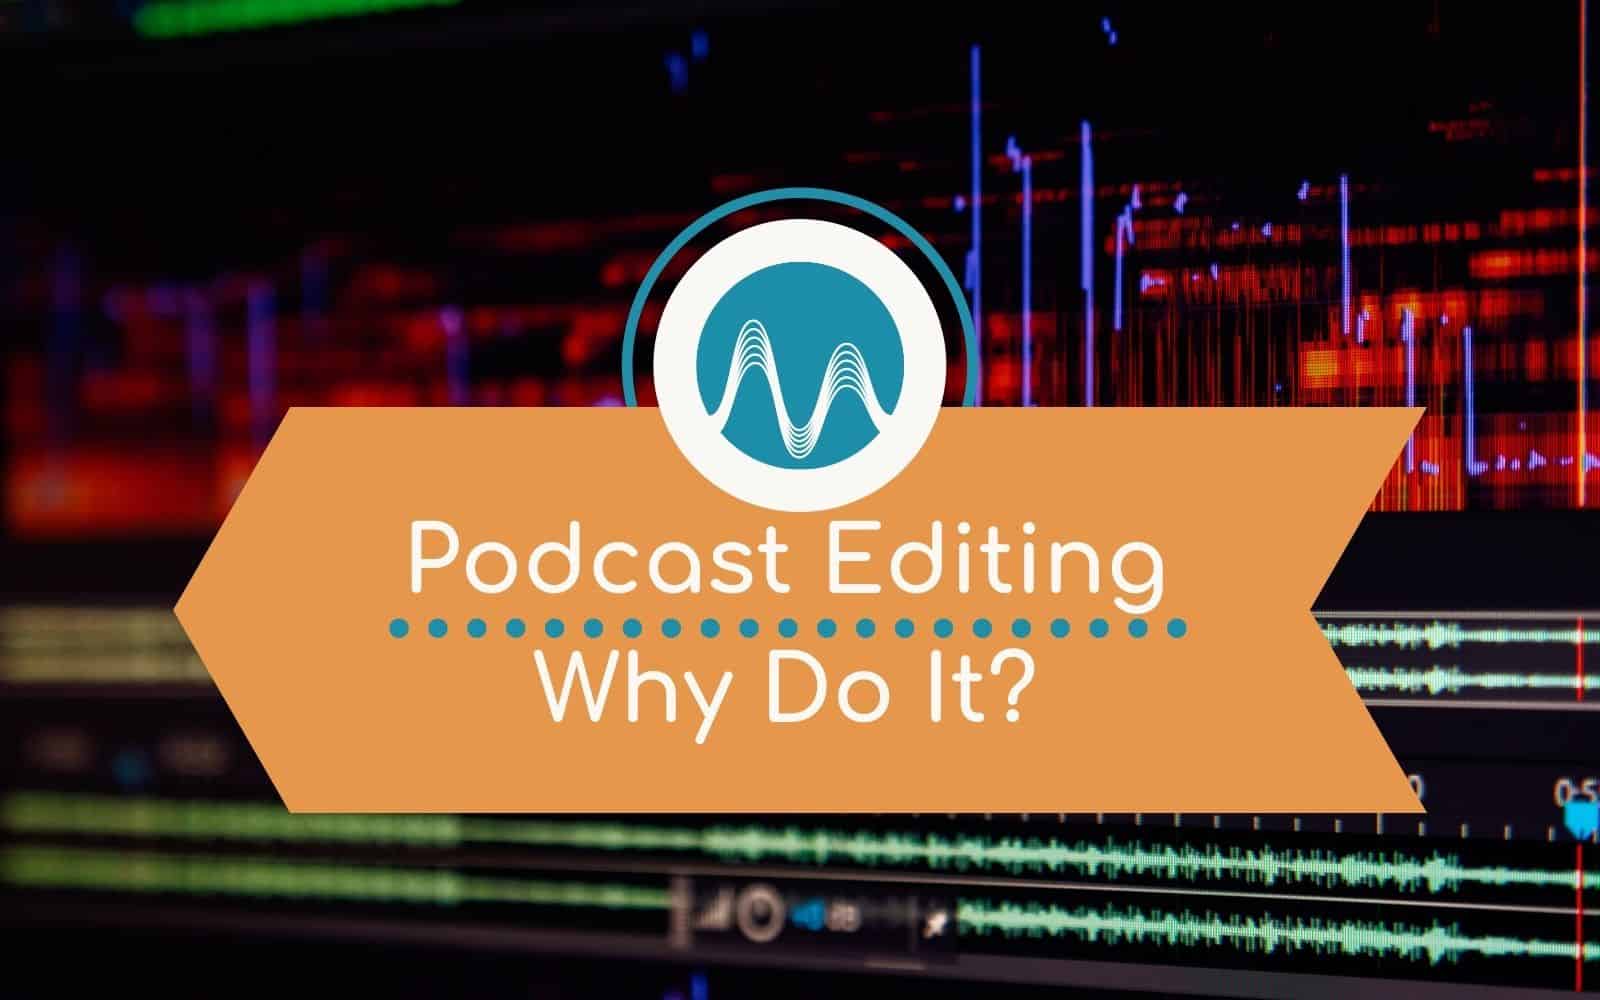 Podcast Editing – Why Should You Produce Your Podcast? Audio Editing podcast editing Music Radio Creative